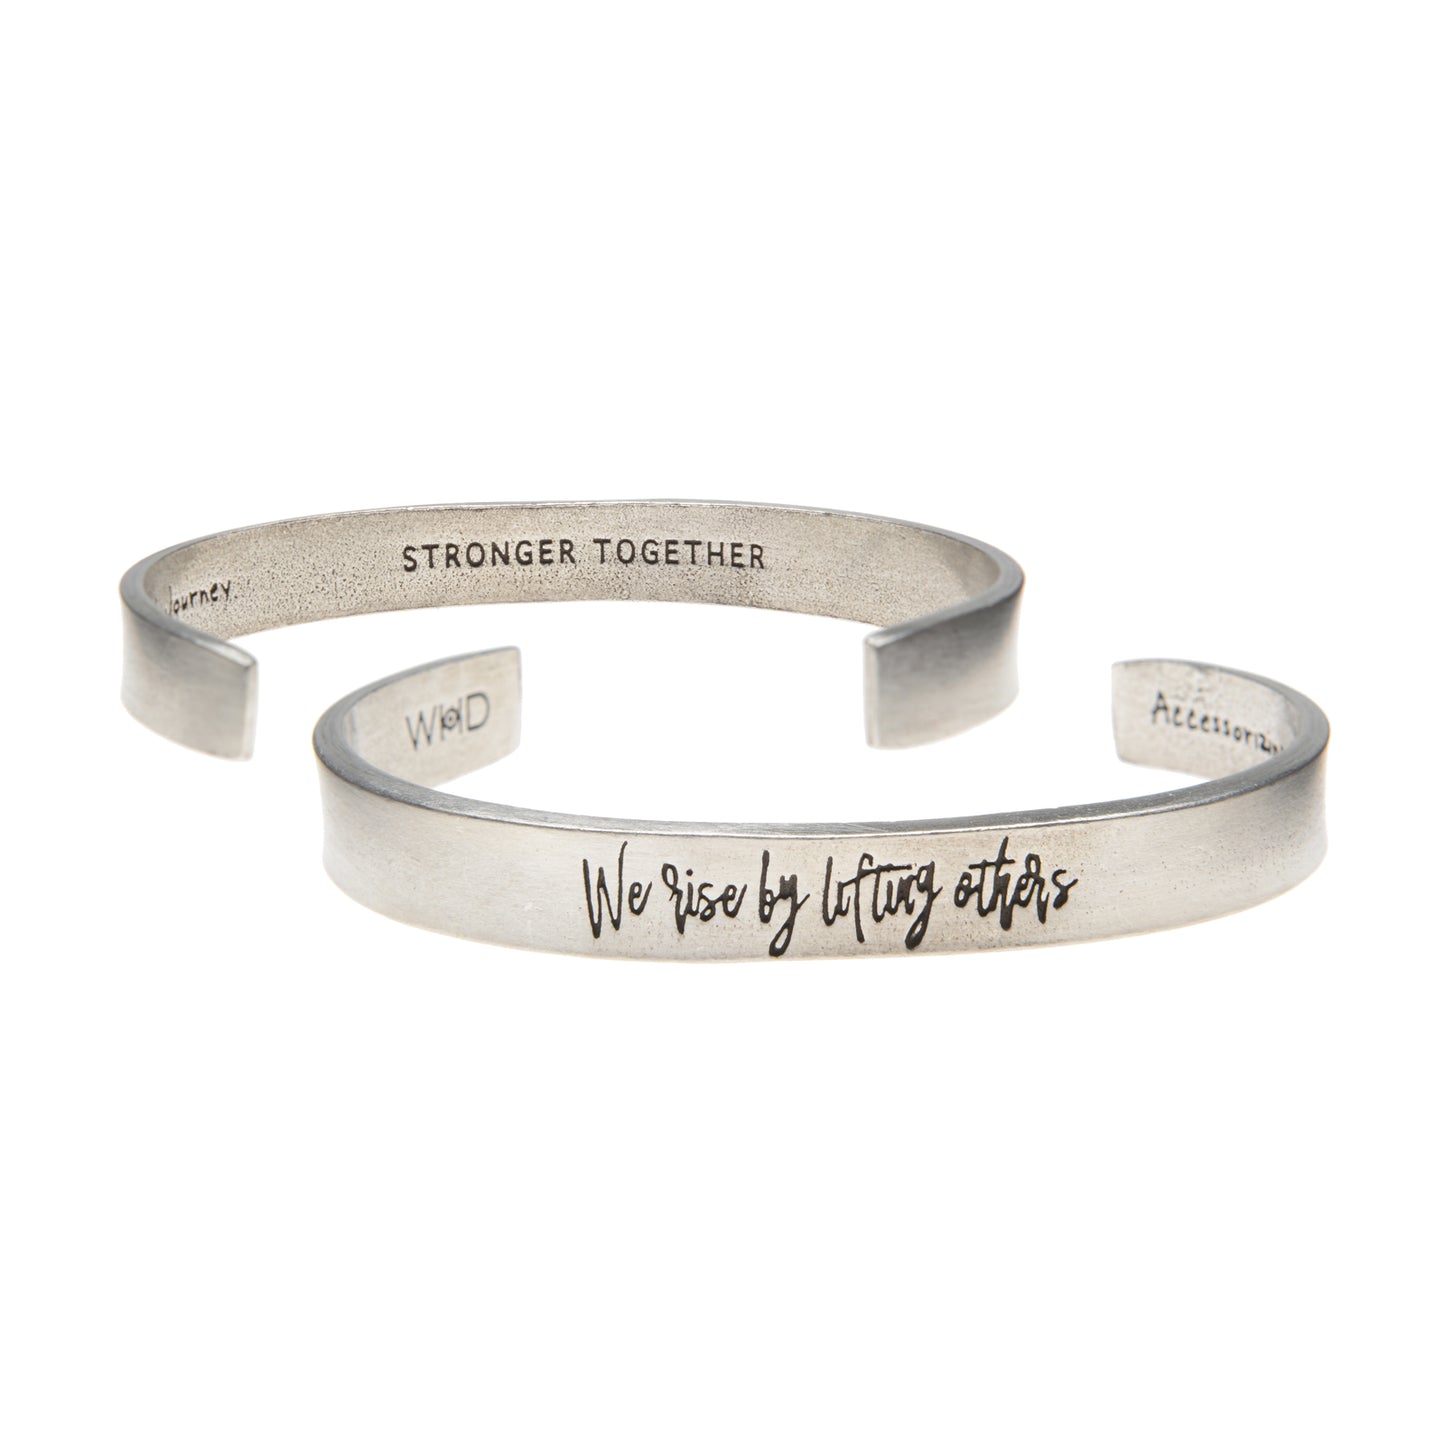 We Rise by Lifting Others Quotable Cuff Bracelets